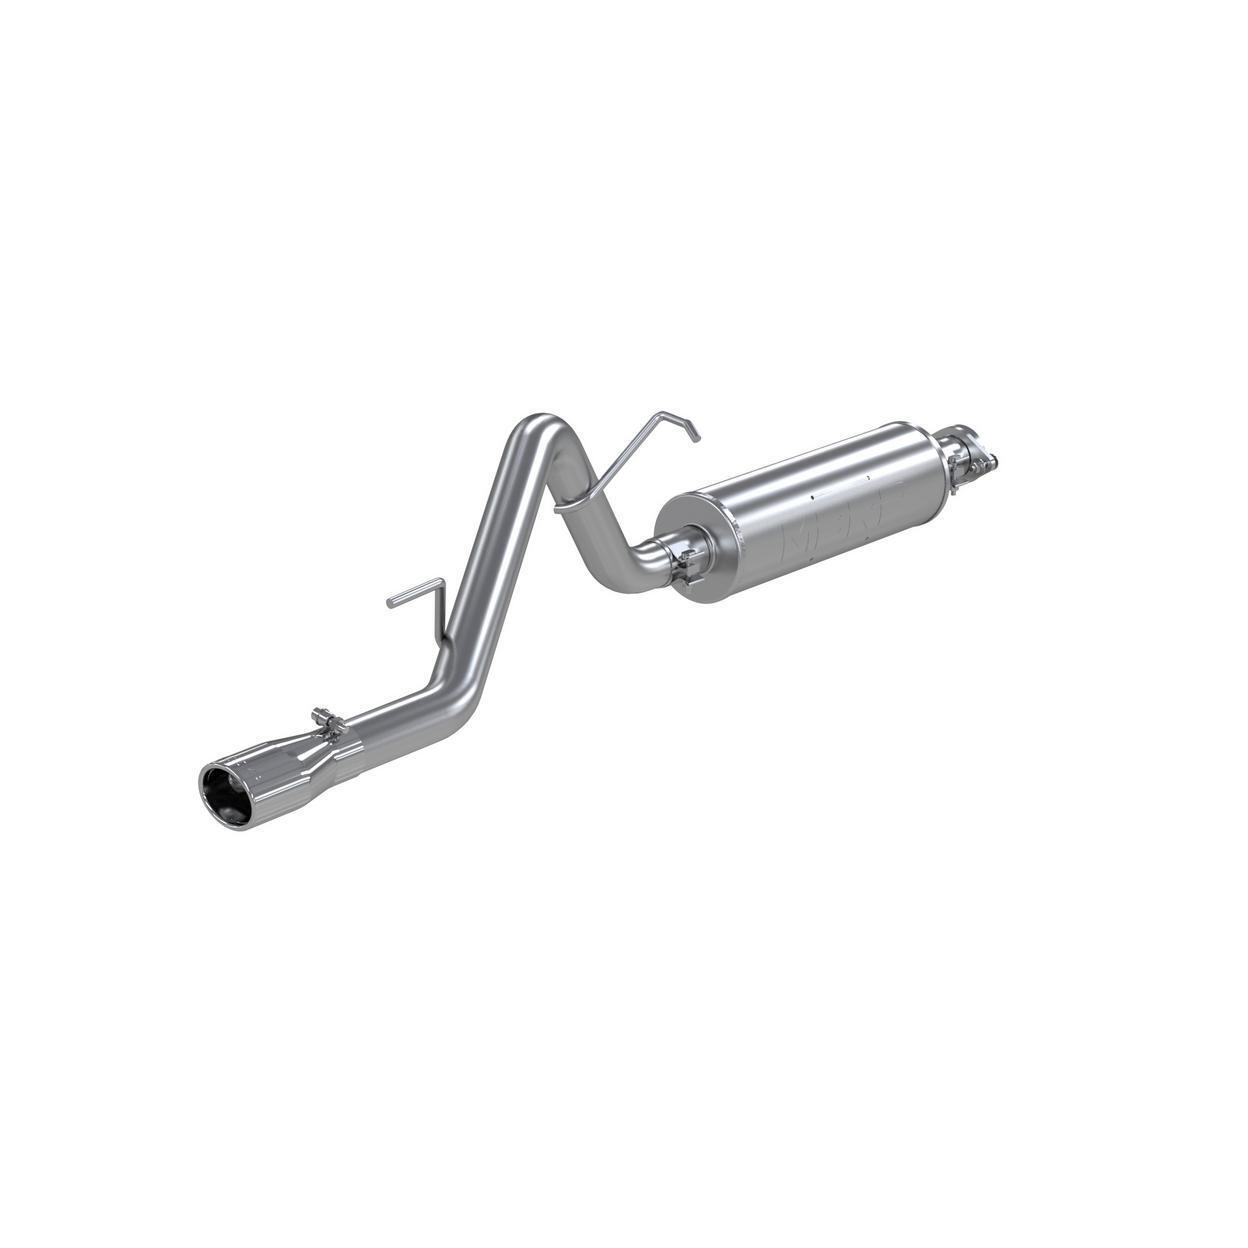 Exhaust System Kit for 2006-2007 Jeep Liberty